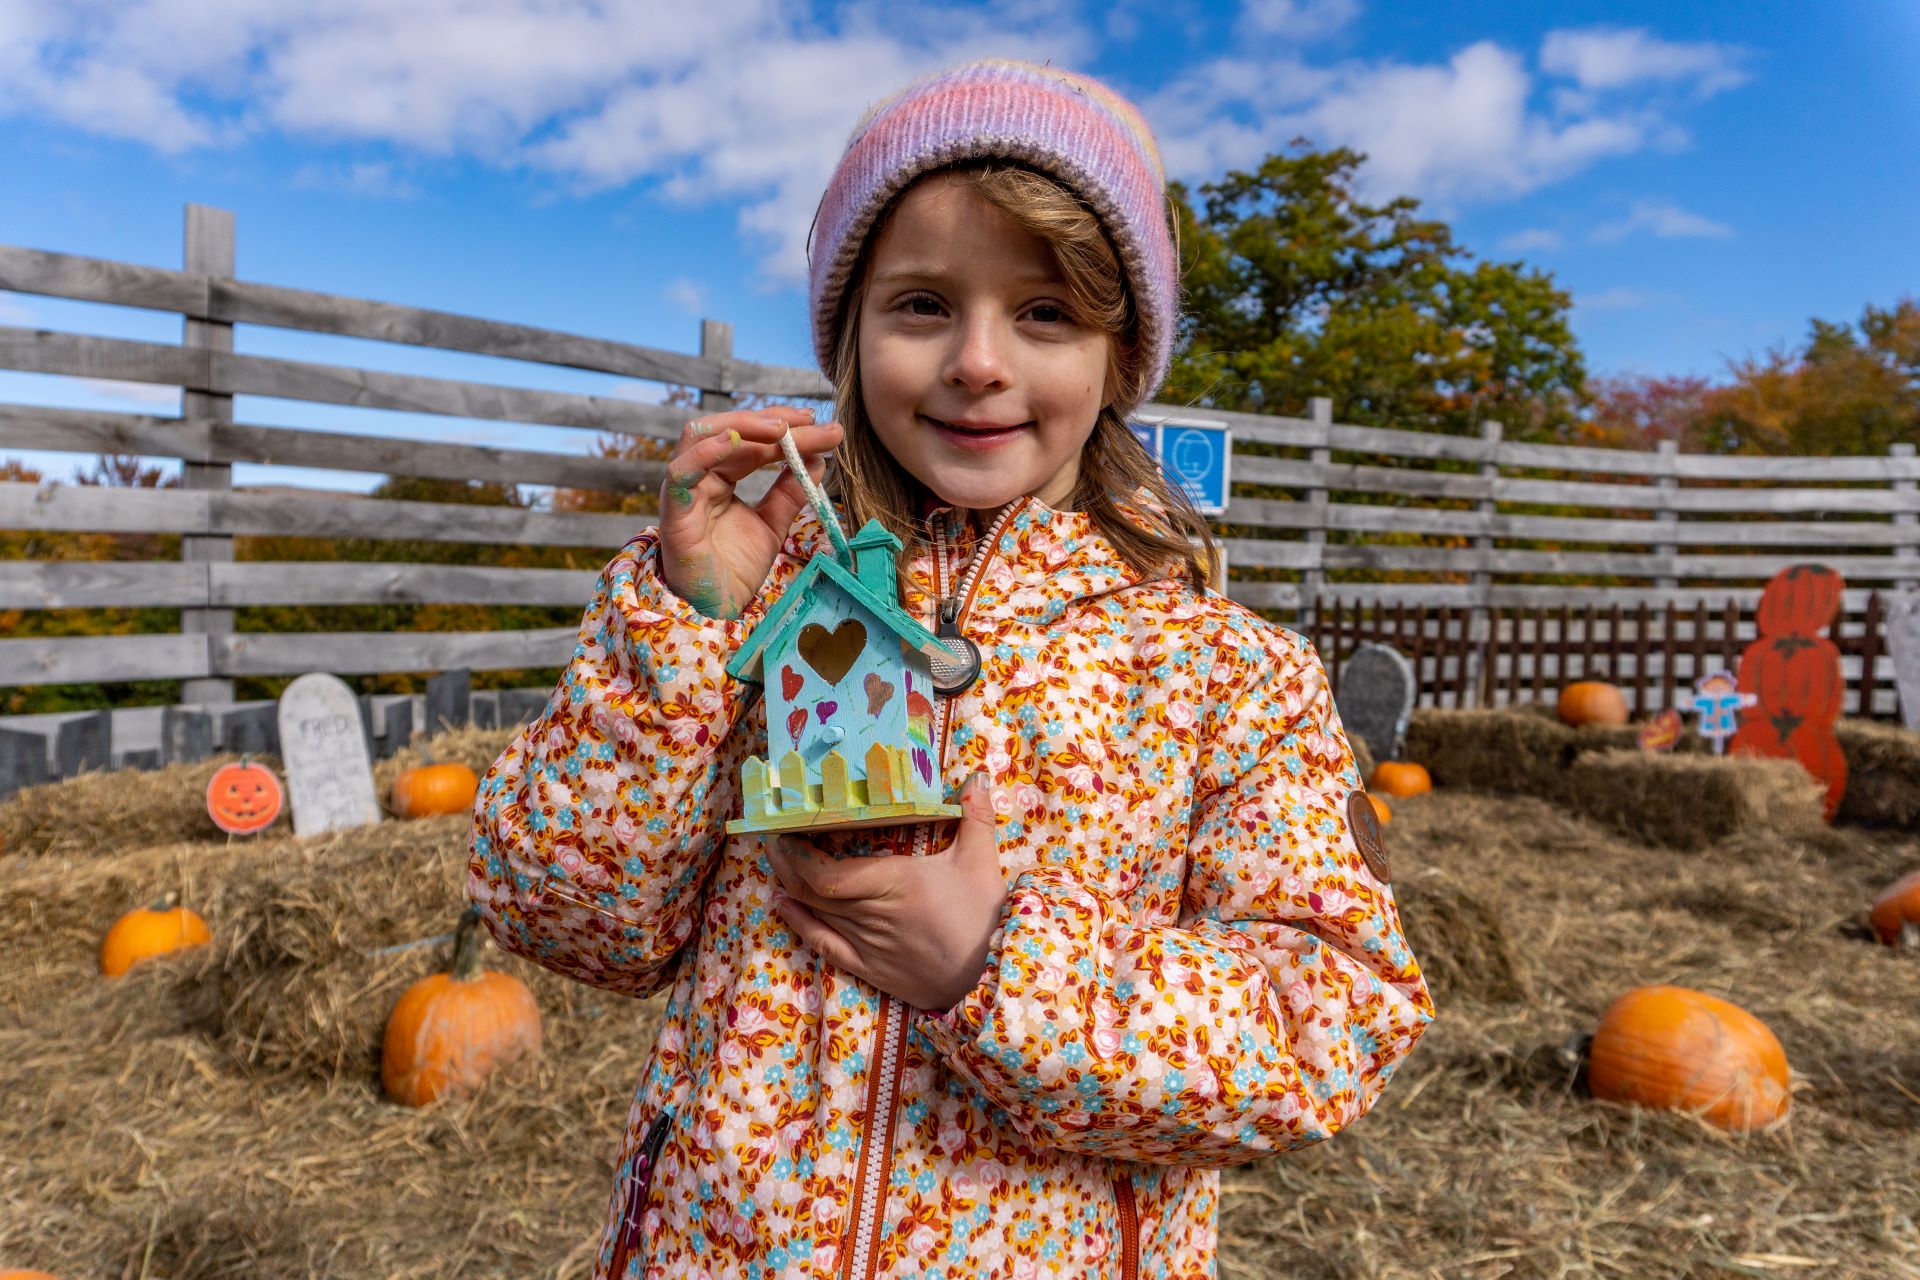 girl holds a handmade birdhouse while standing in pumpkin patch